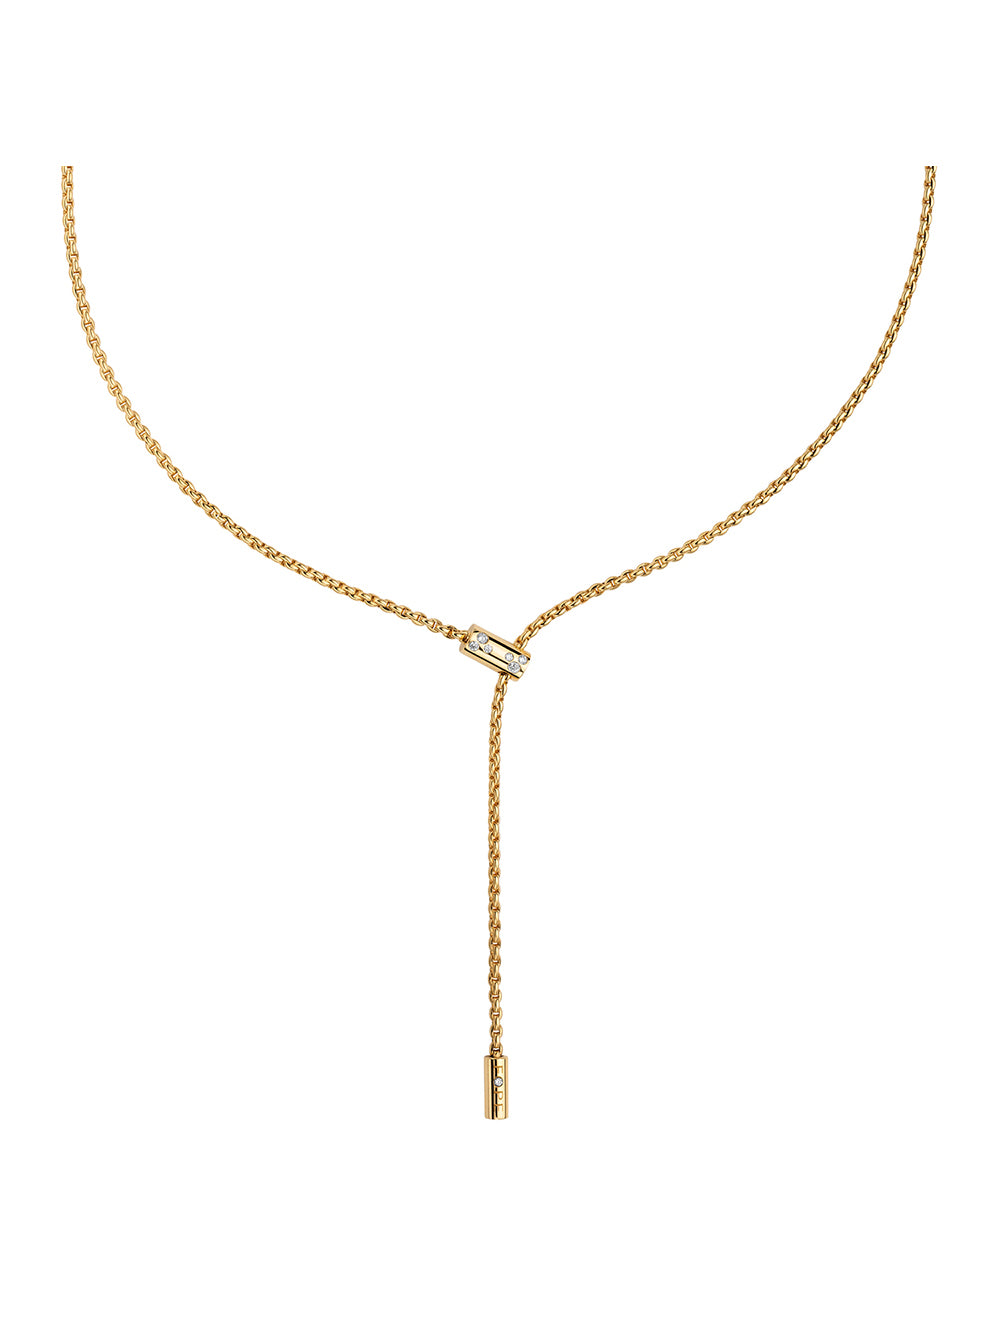 Fope Aria Necklace in 18ct Yellow Gold with Diamonds